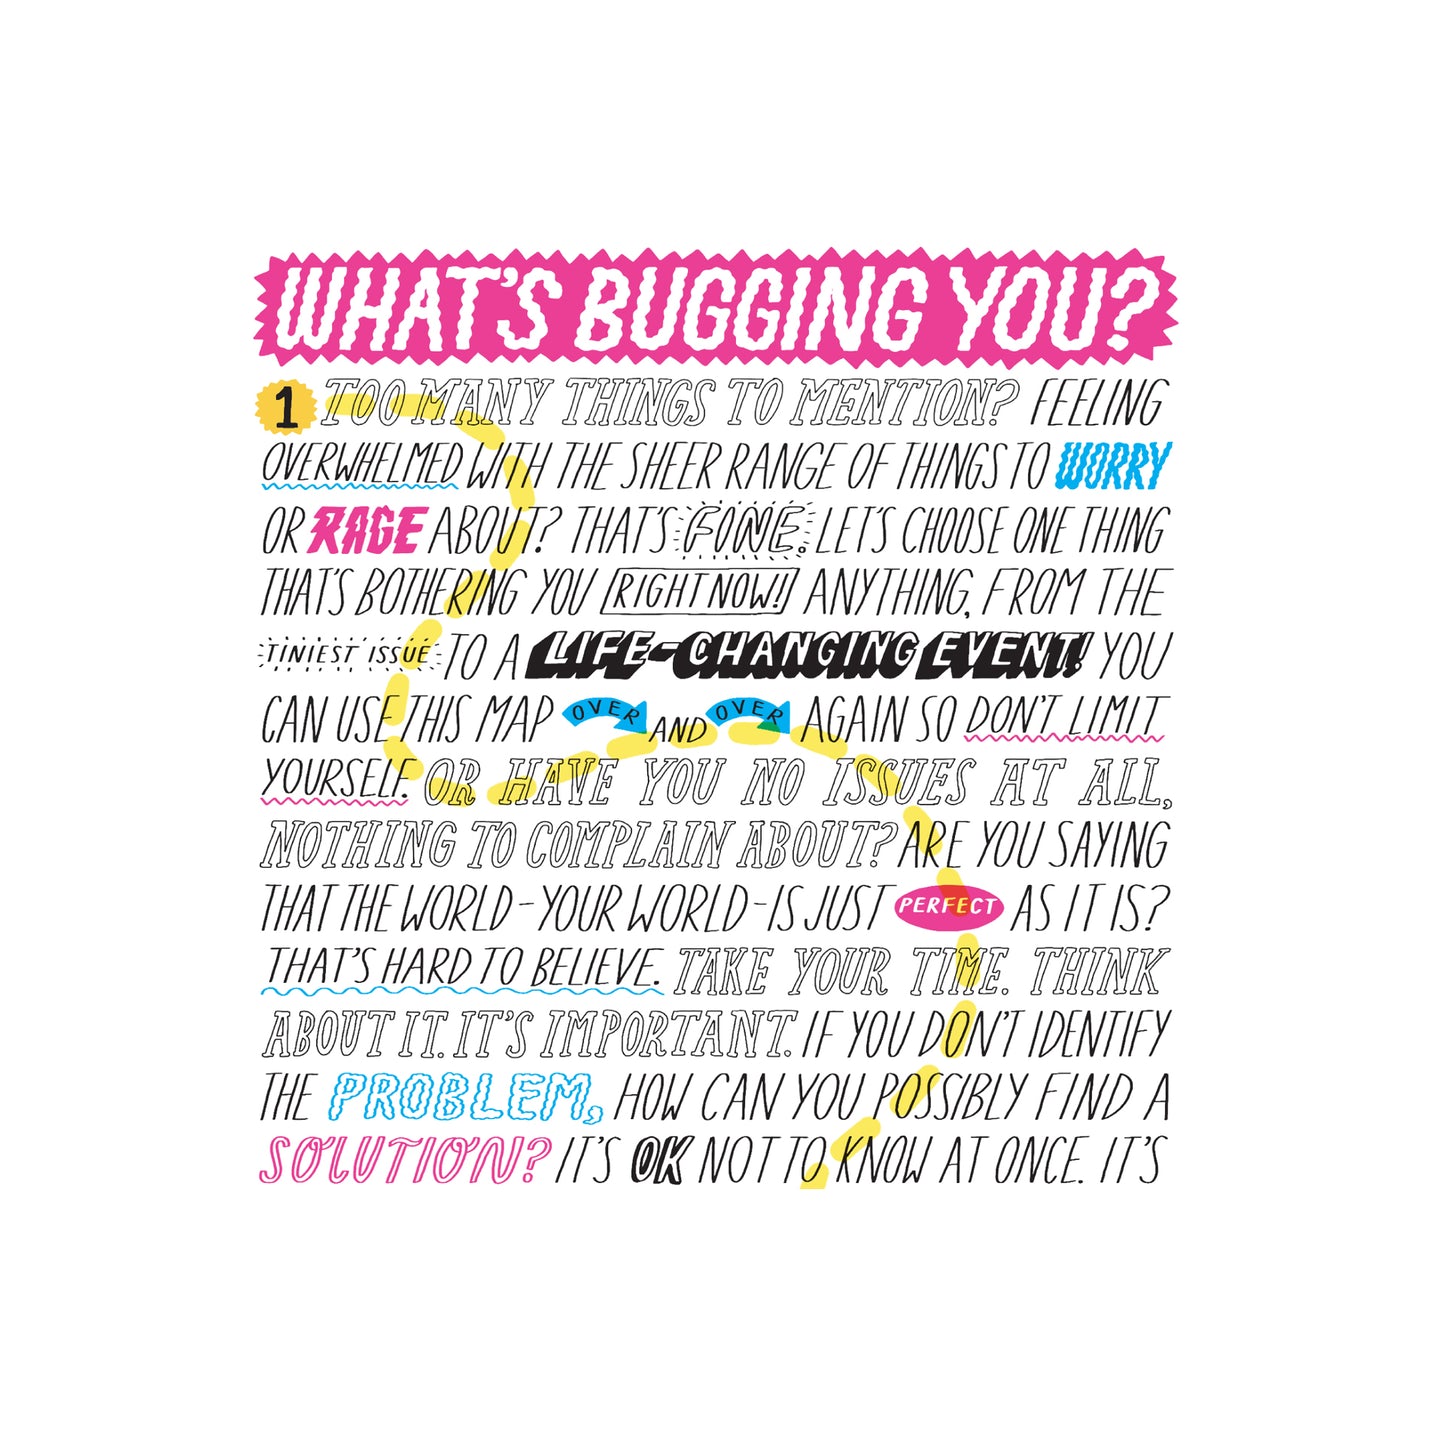 What's Bugging You?